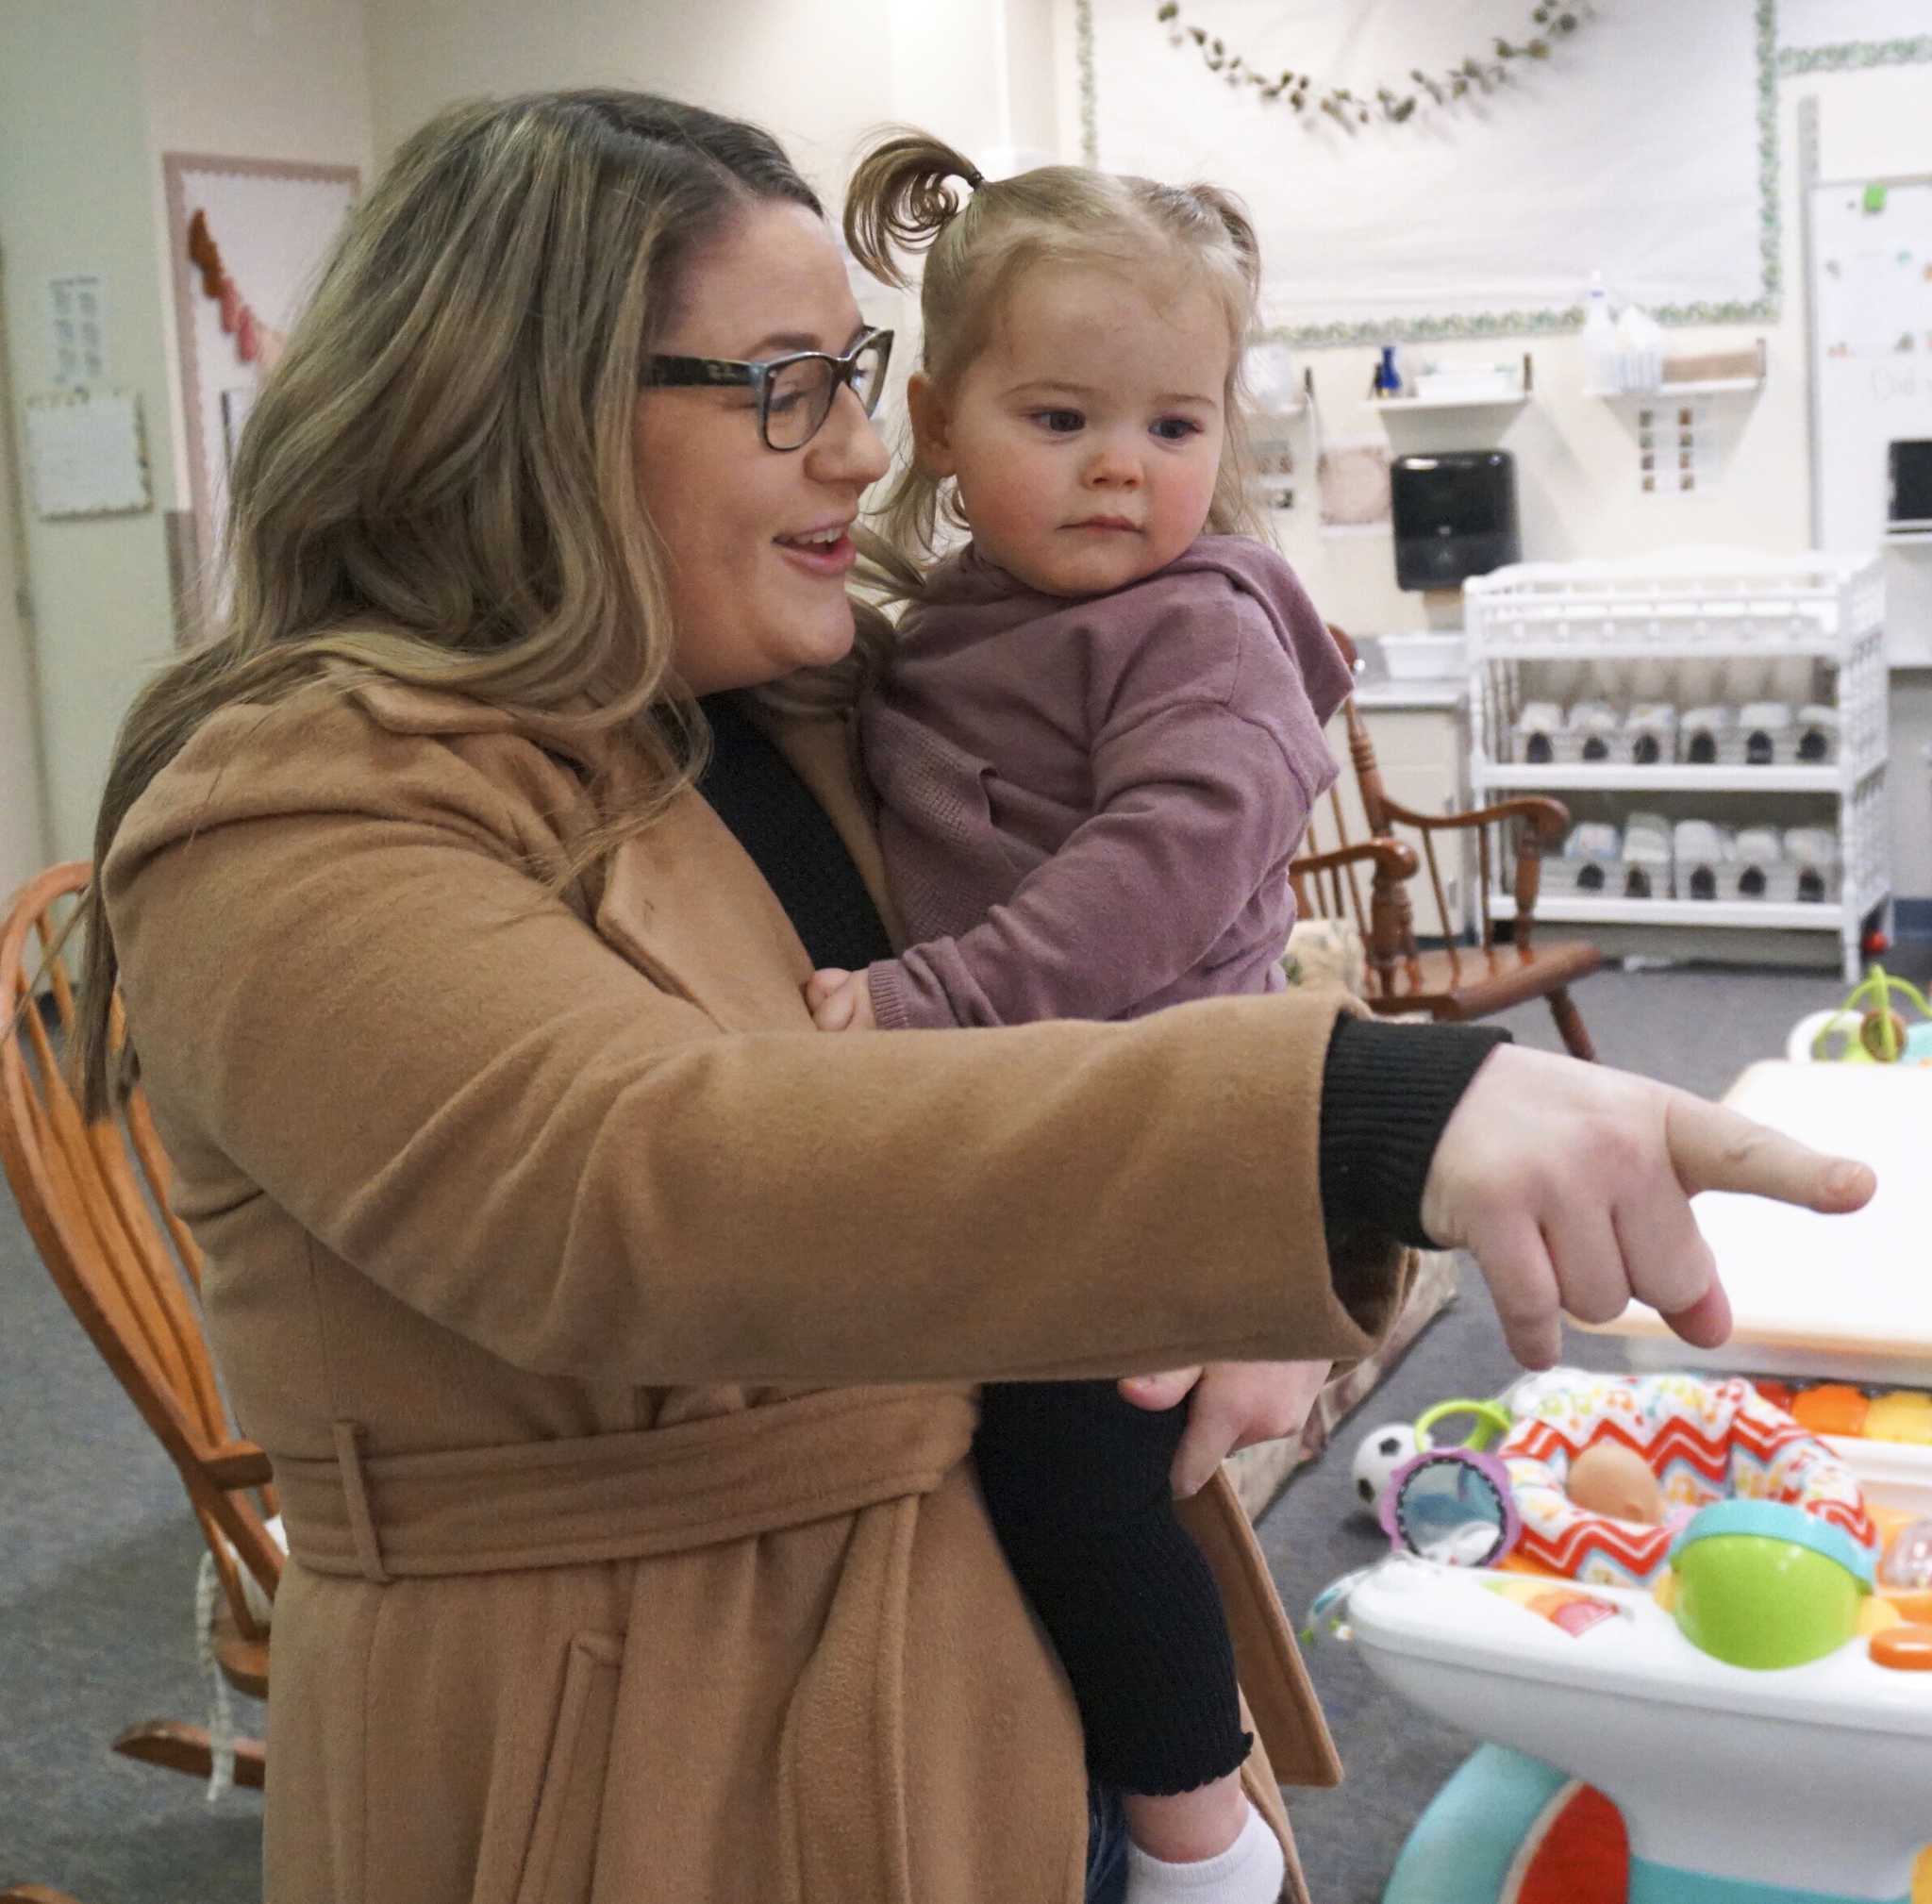 One way to appreciate teachers: These schools provide their day care